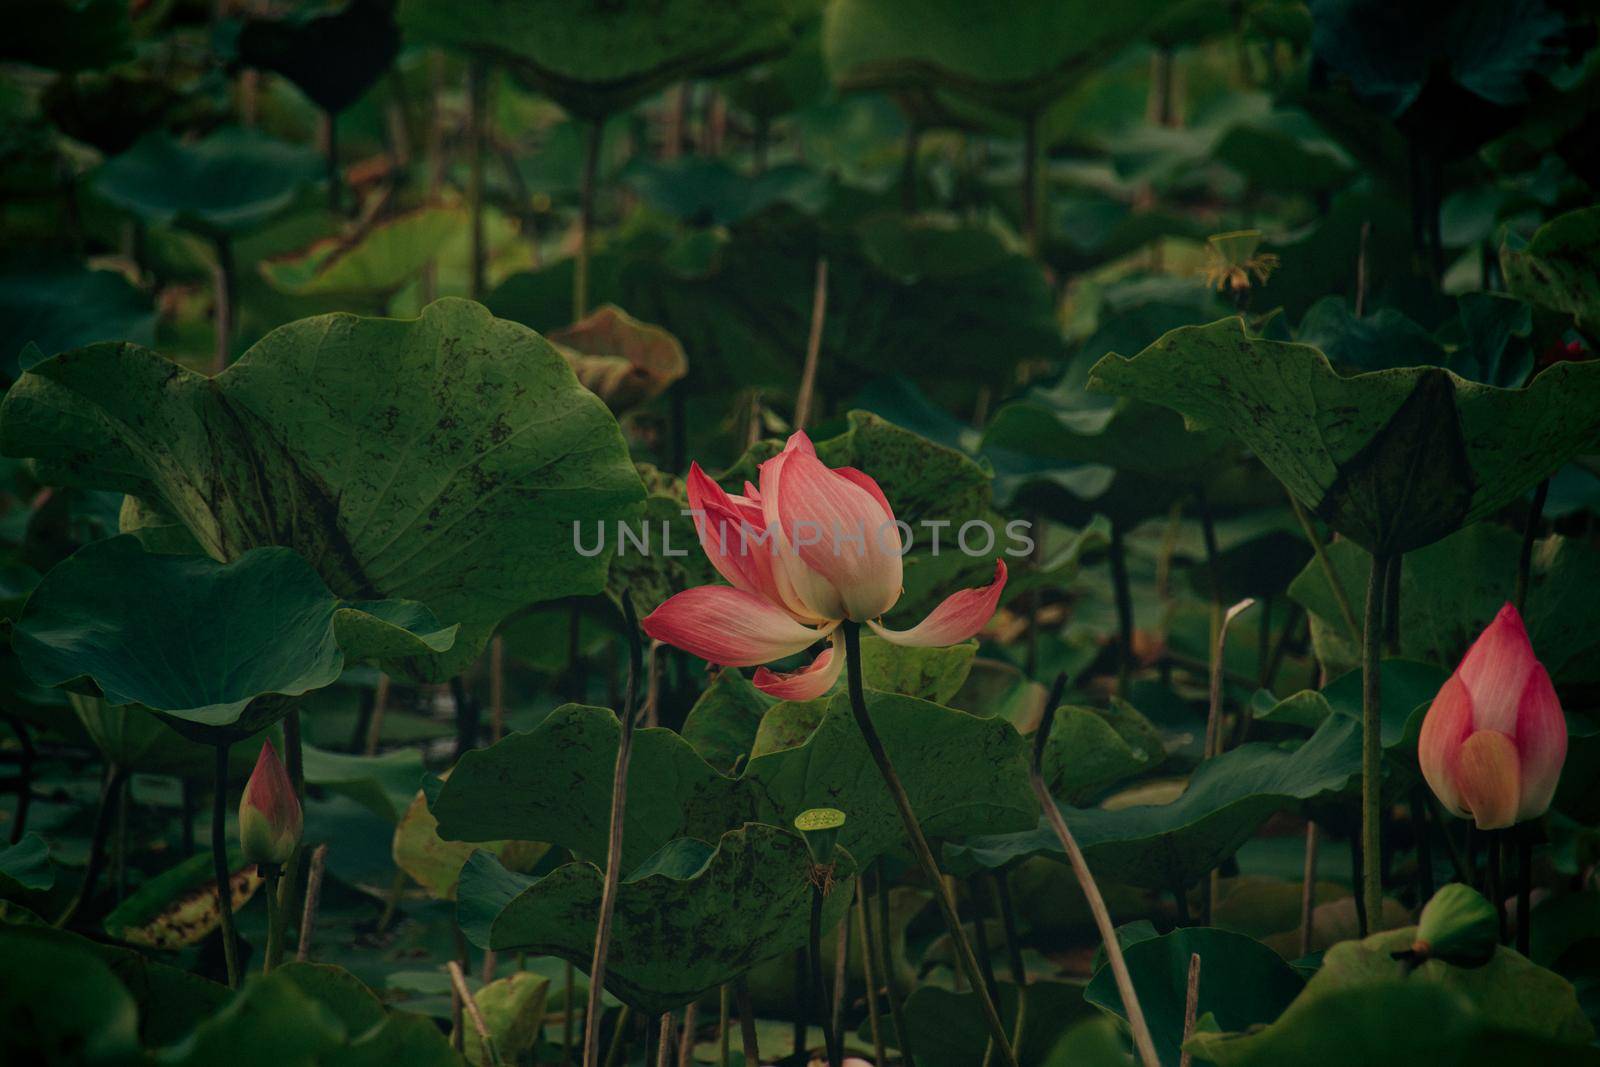 Lotus flower or Nelumbo nucifera in a pond of gently swaying leaves by Sonnet15